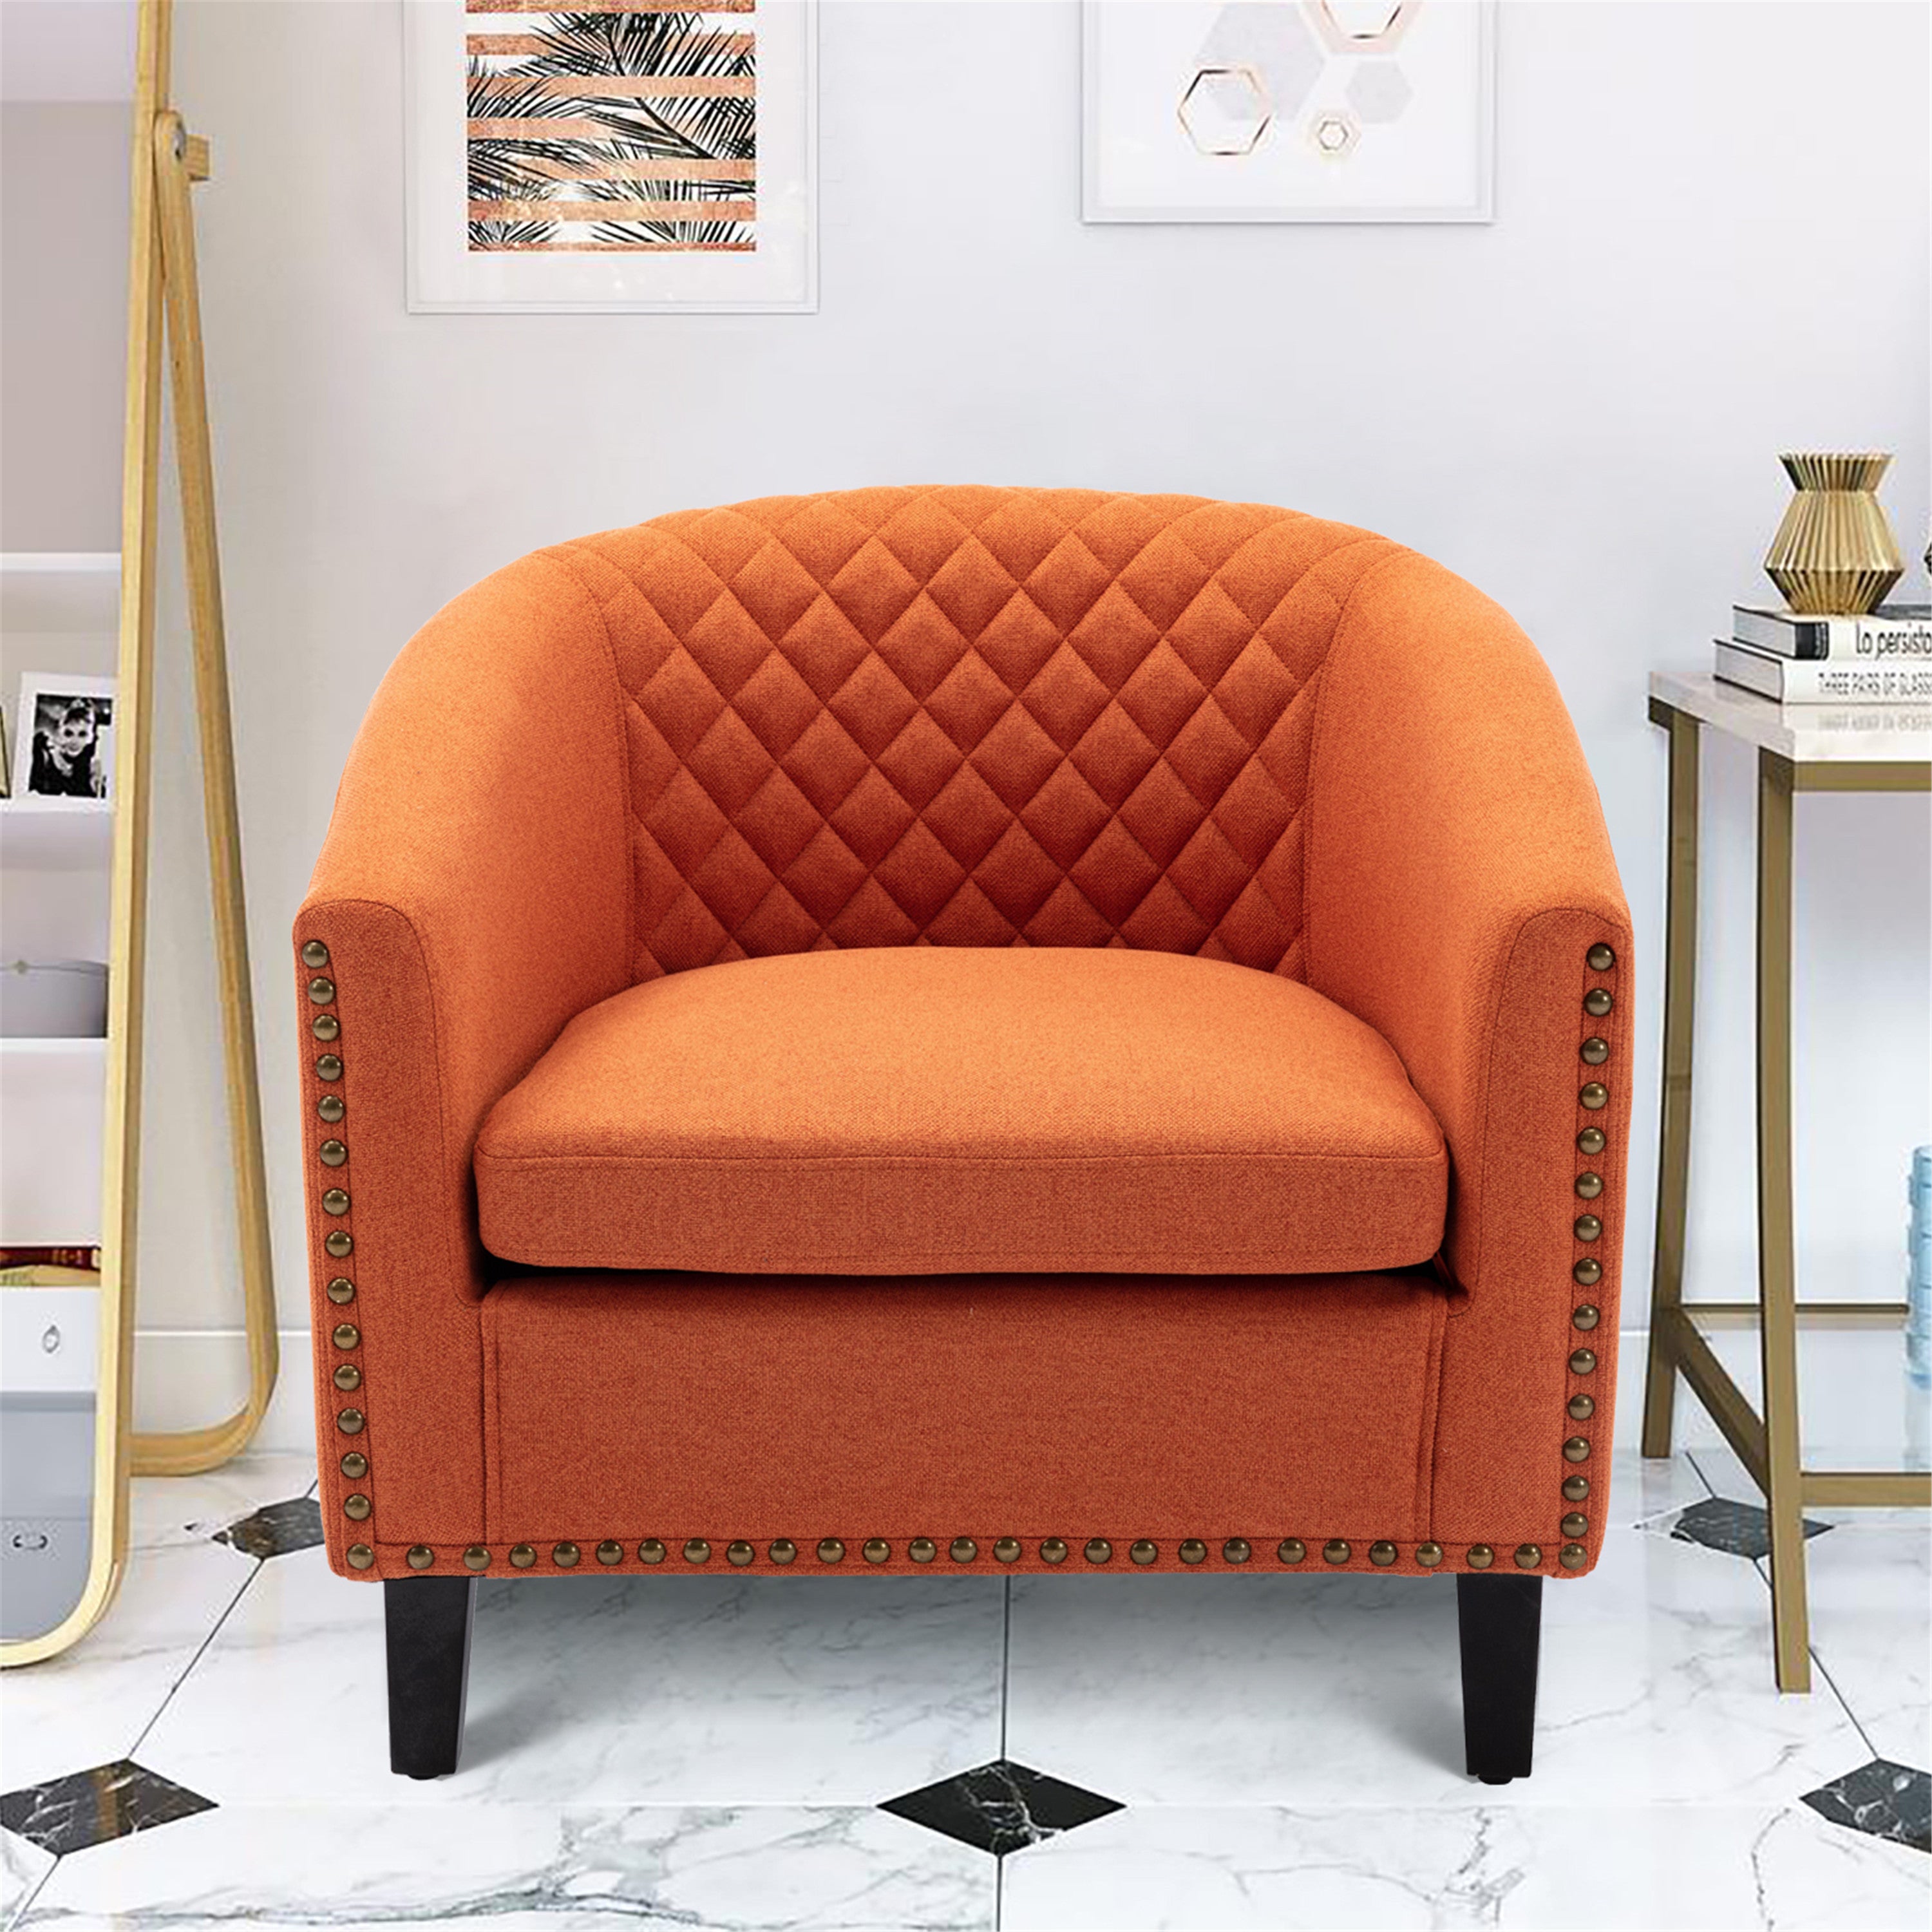 🆓🚛 Accent Barrel Chair Living Room Chair With Nailheads and Solid Wood Legs, Orange Linen